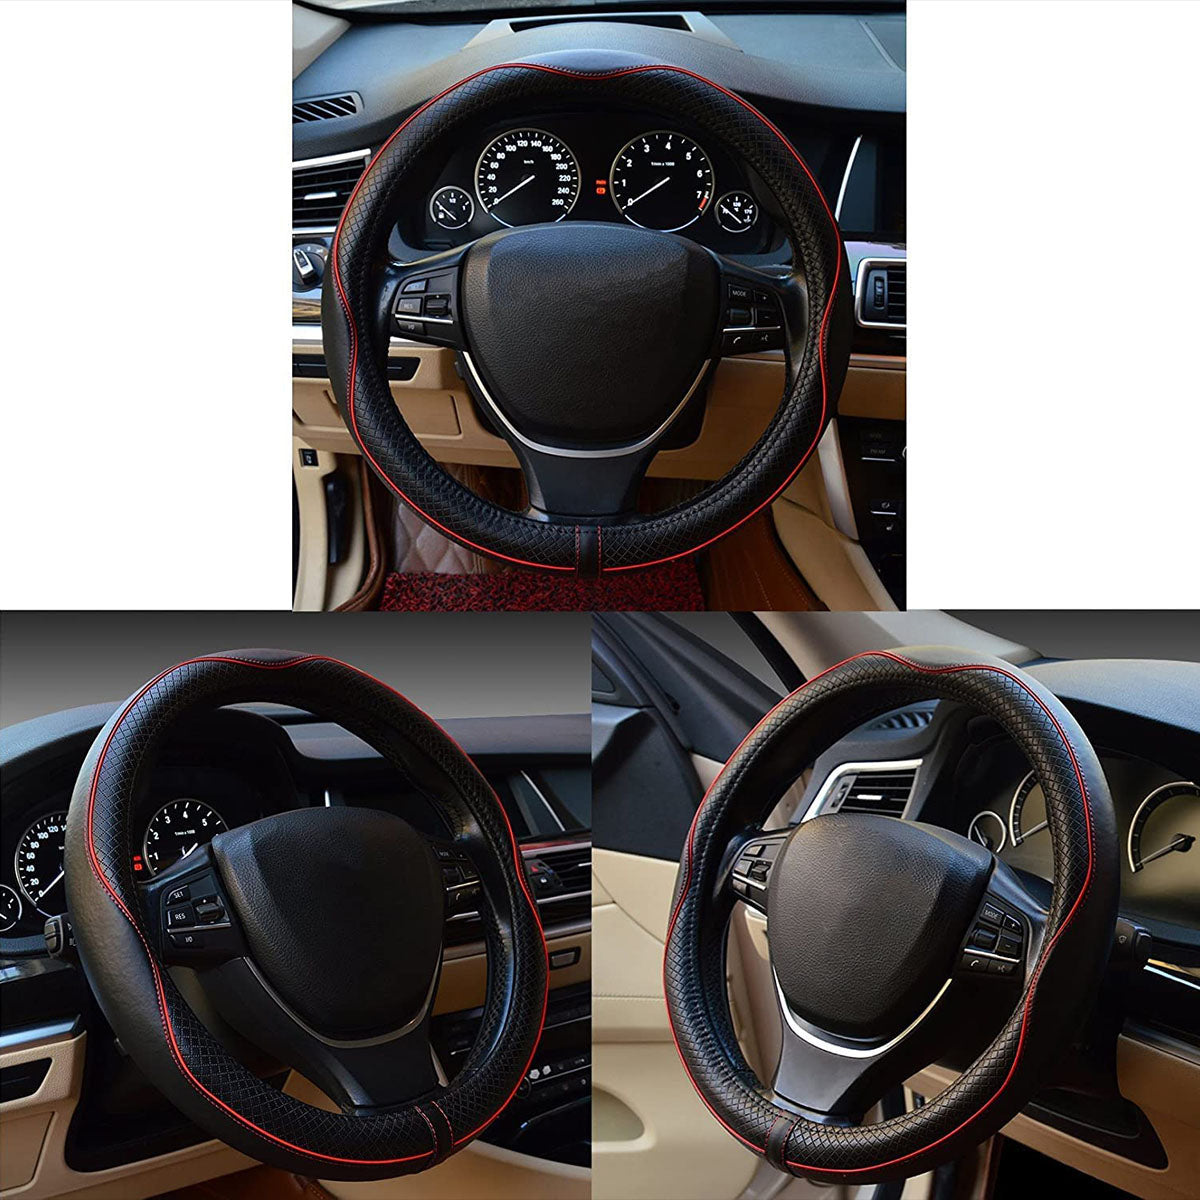 Car Steering Wheel Cover, Custom For Your Cars, Anti-Slip, Safety, Soft, Breathable, Heavy Duty, Thick, Full Surround, Sports Style, Car Accessories HA18990